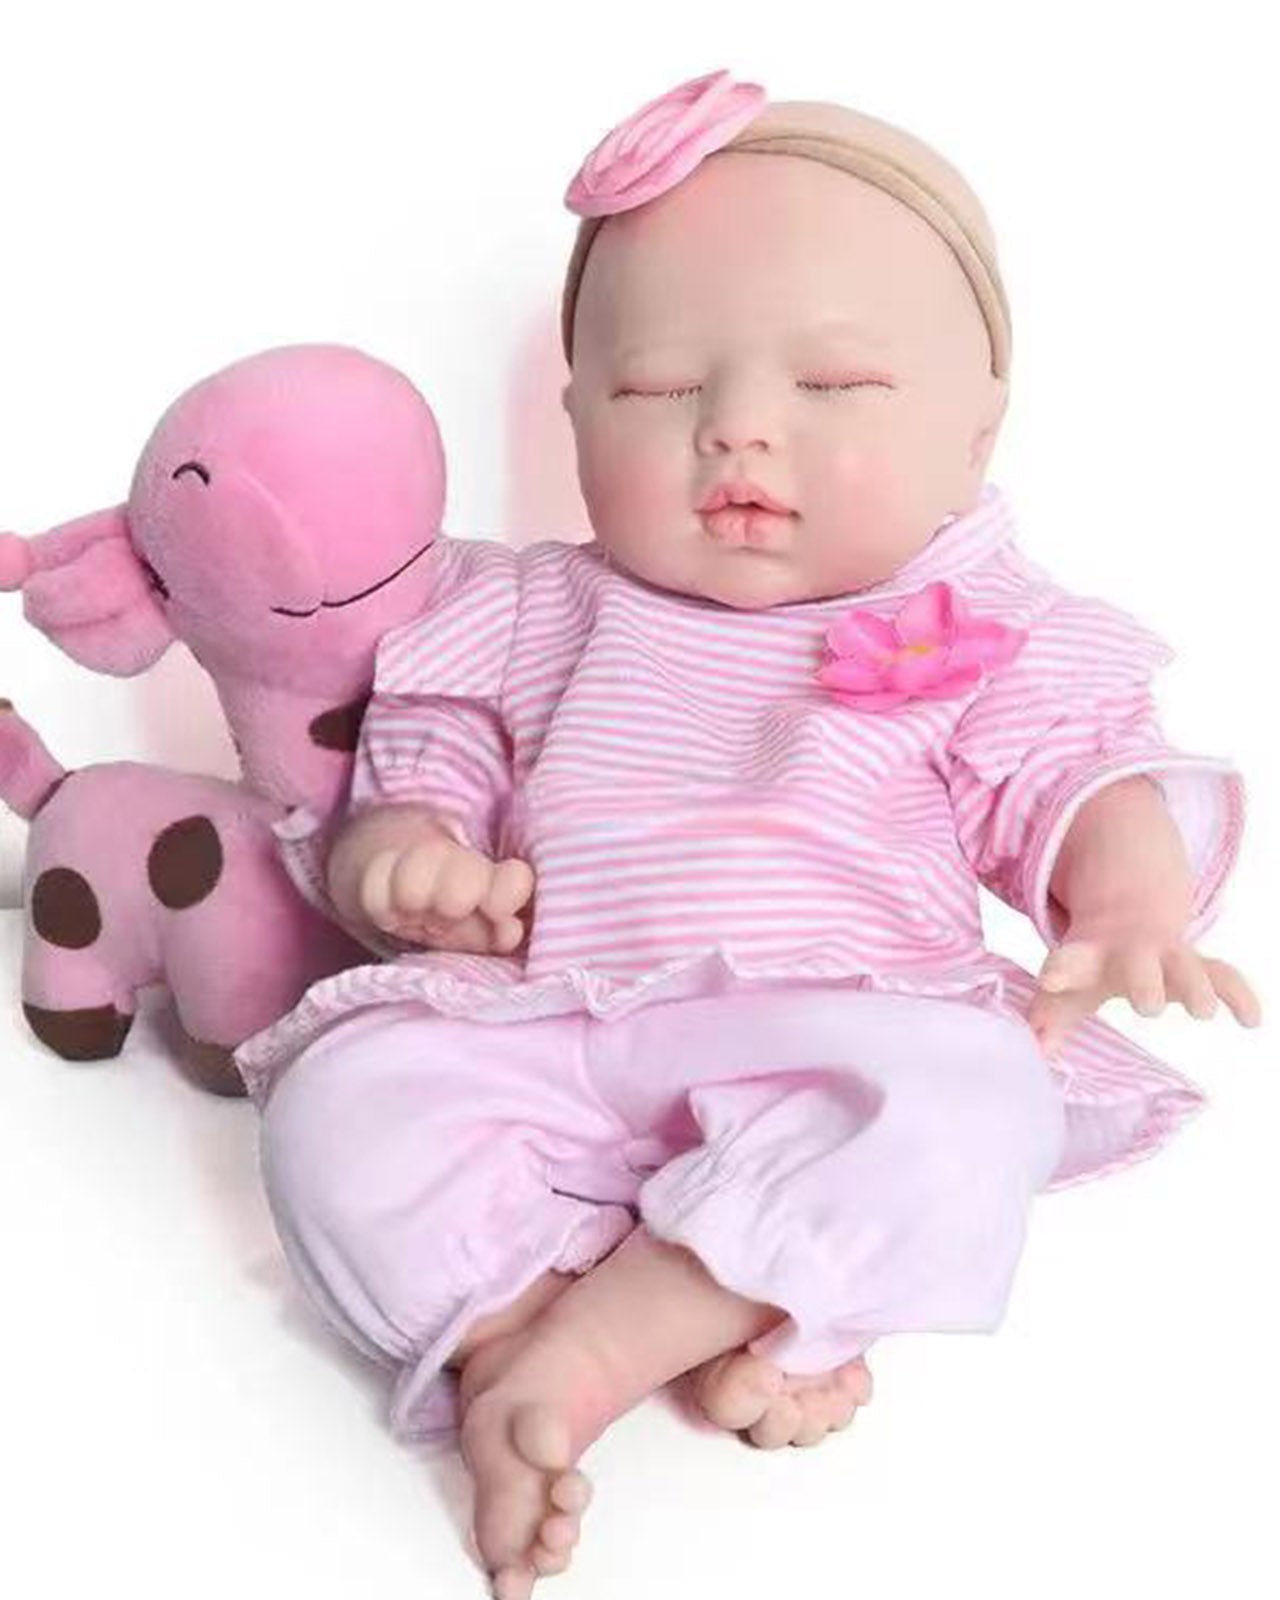 Uerica - 13" Full Silicone Reborn Baby Dolls Cute Sleeping Premature Girl with Soft Touch